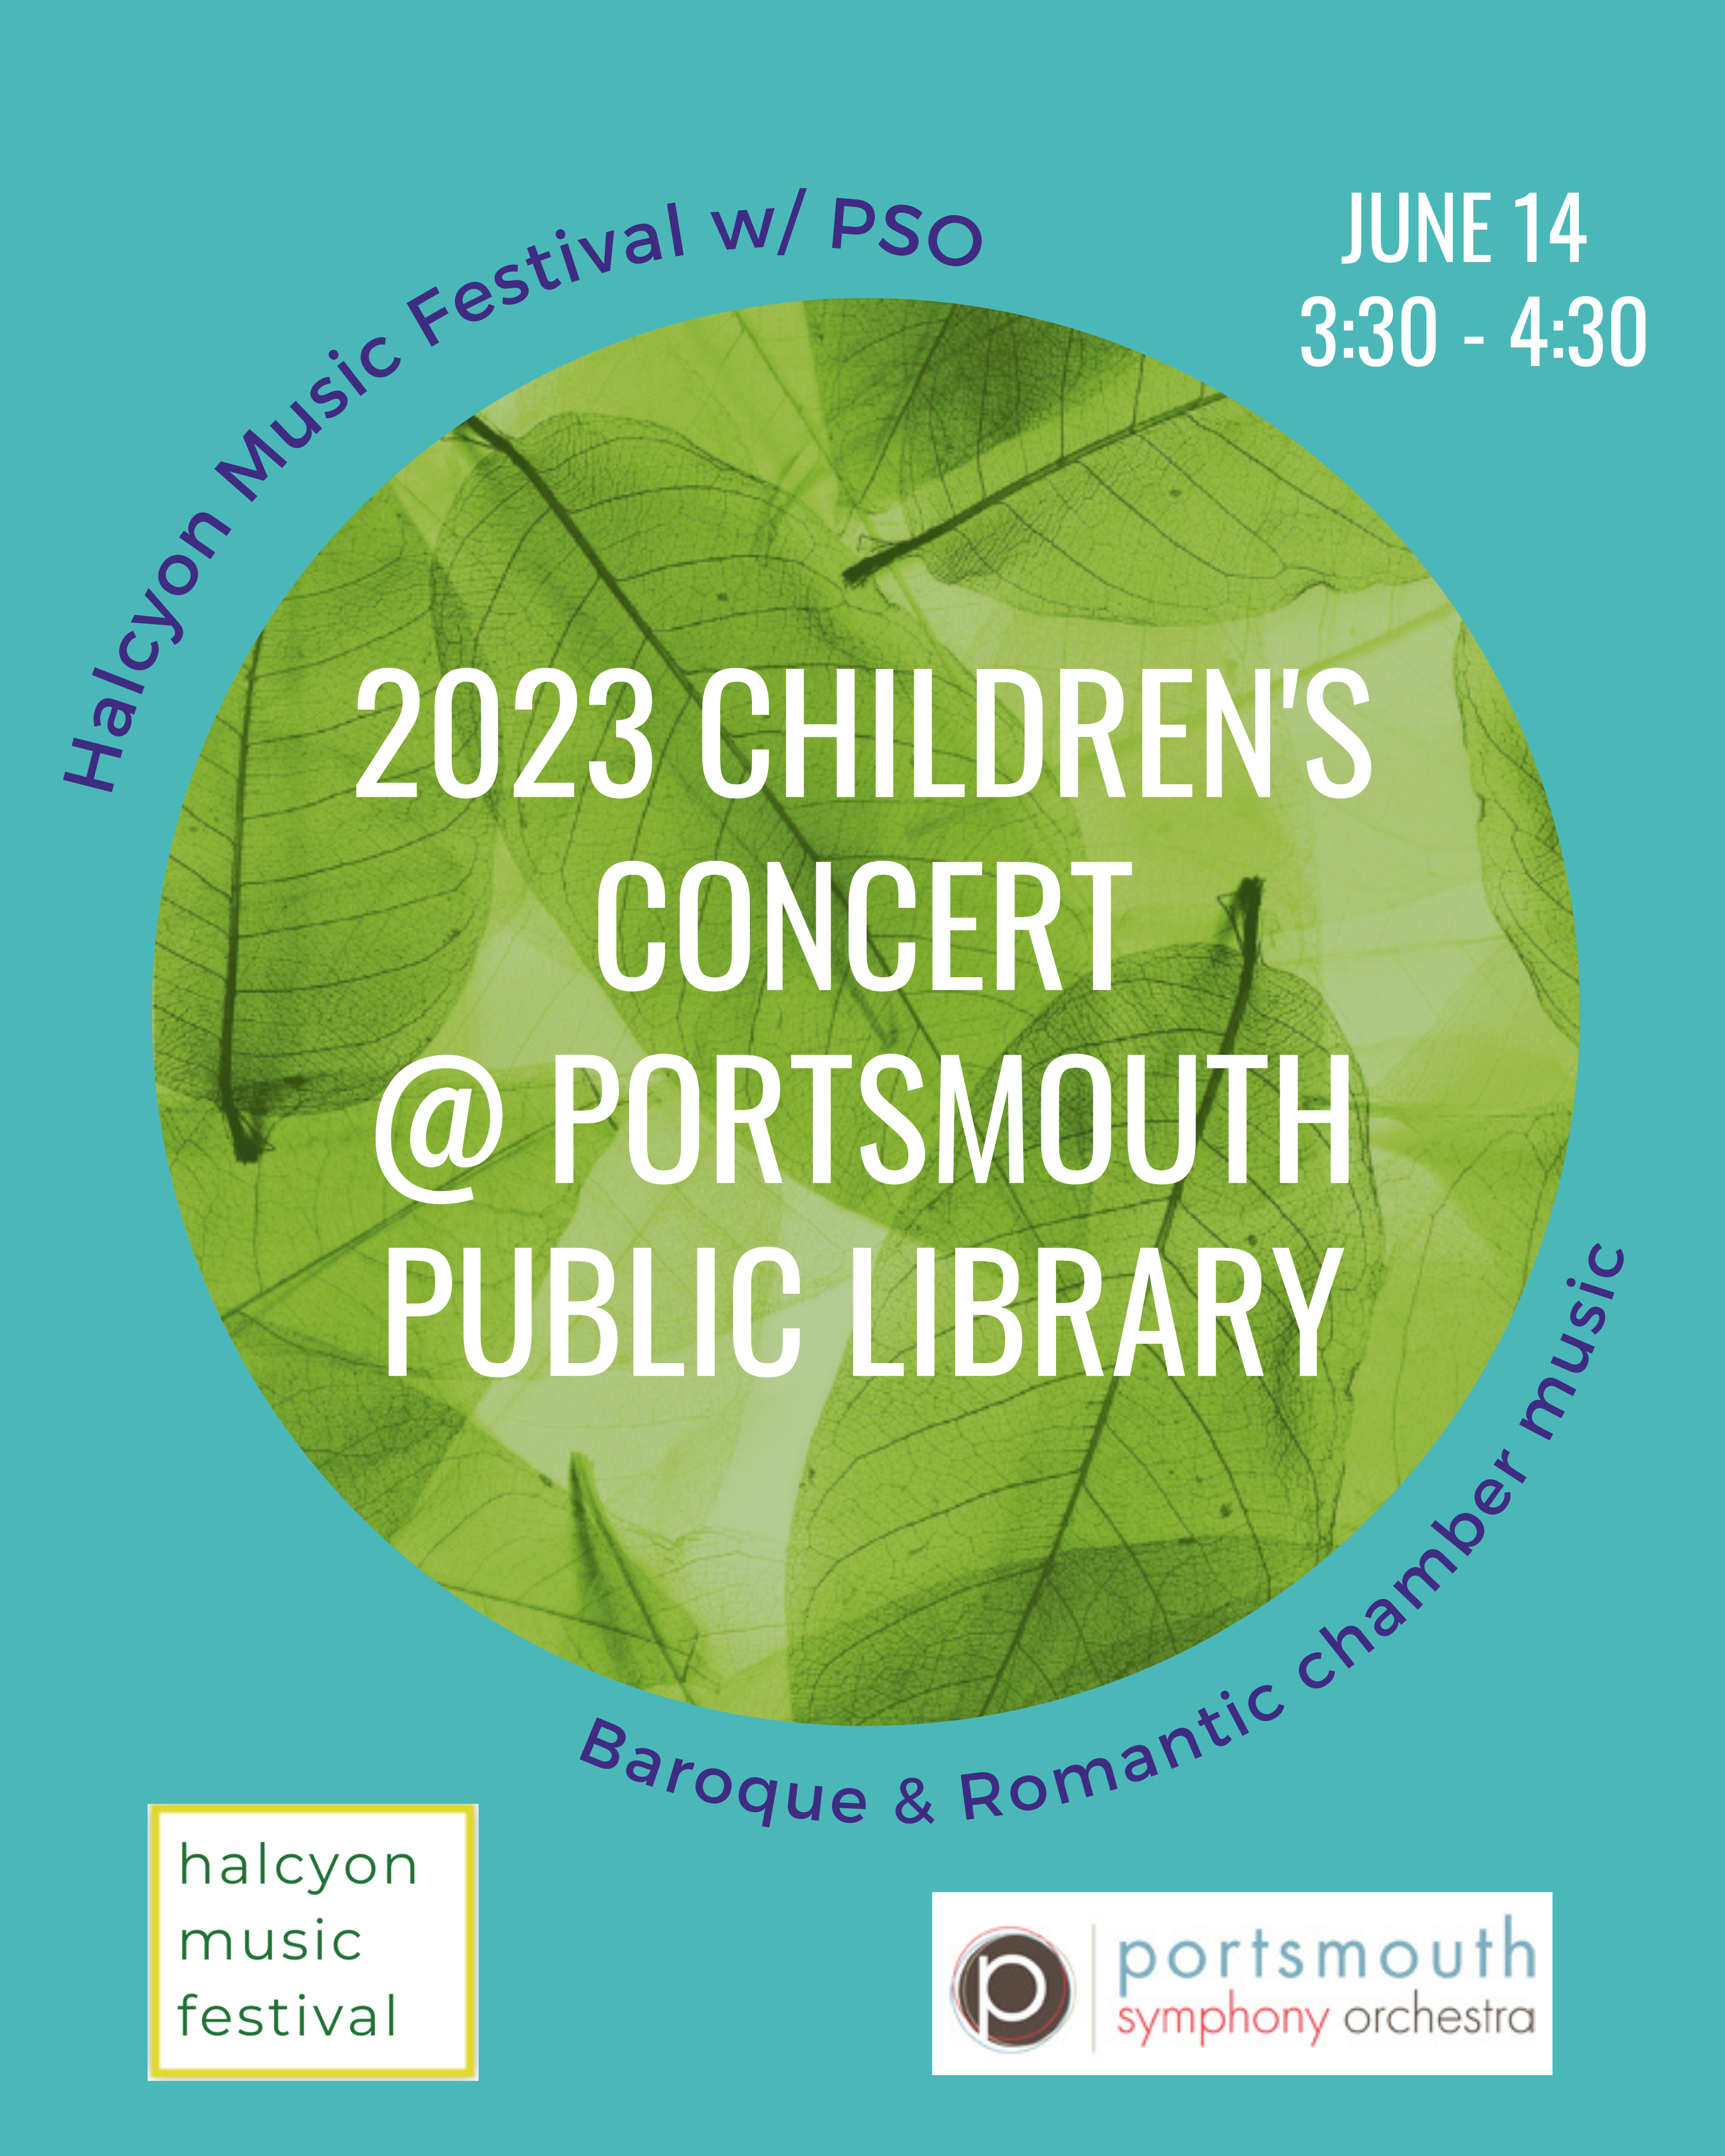 2023 Childrens' Concert with Halcyon Music Festival and Portsmouth Symphony Orchestra